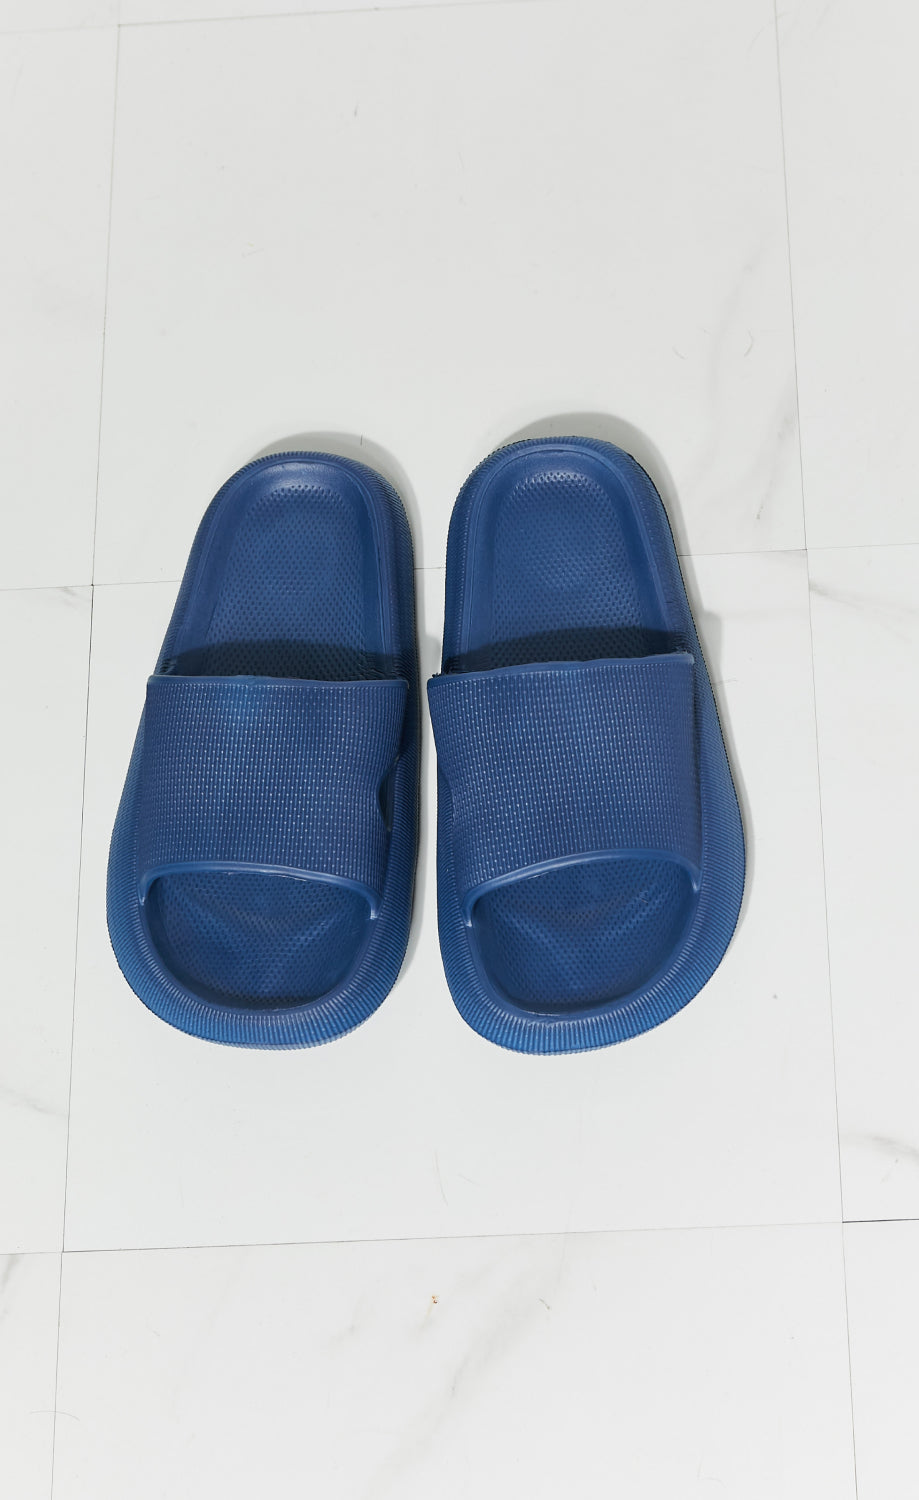 MMShoes Arms Around Me Open Toe Slide in Navy MMShoes